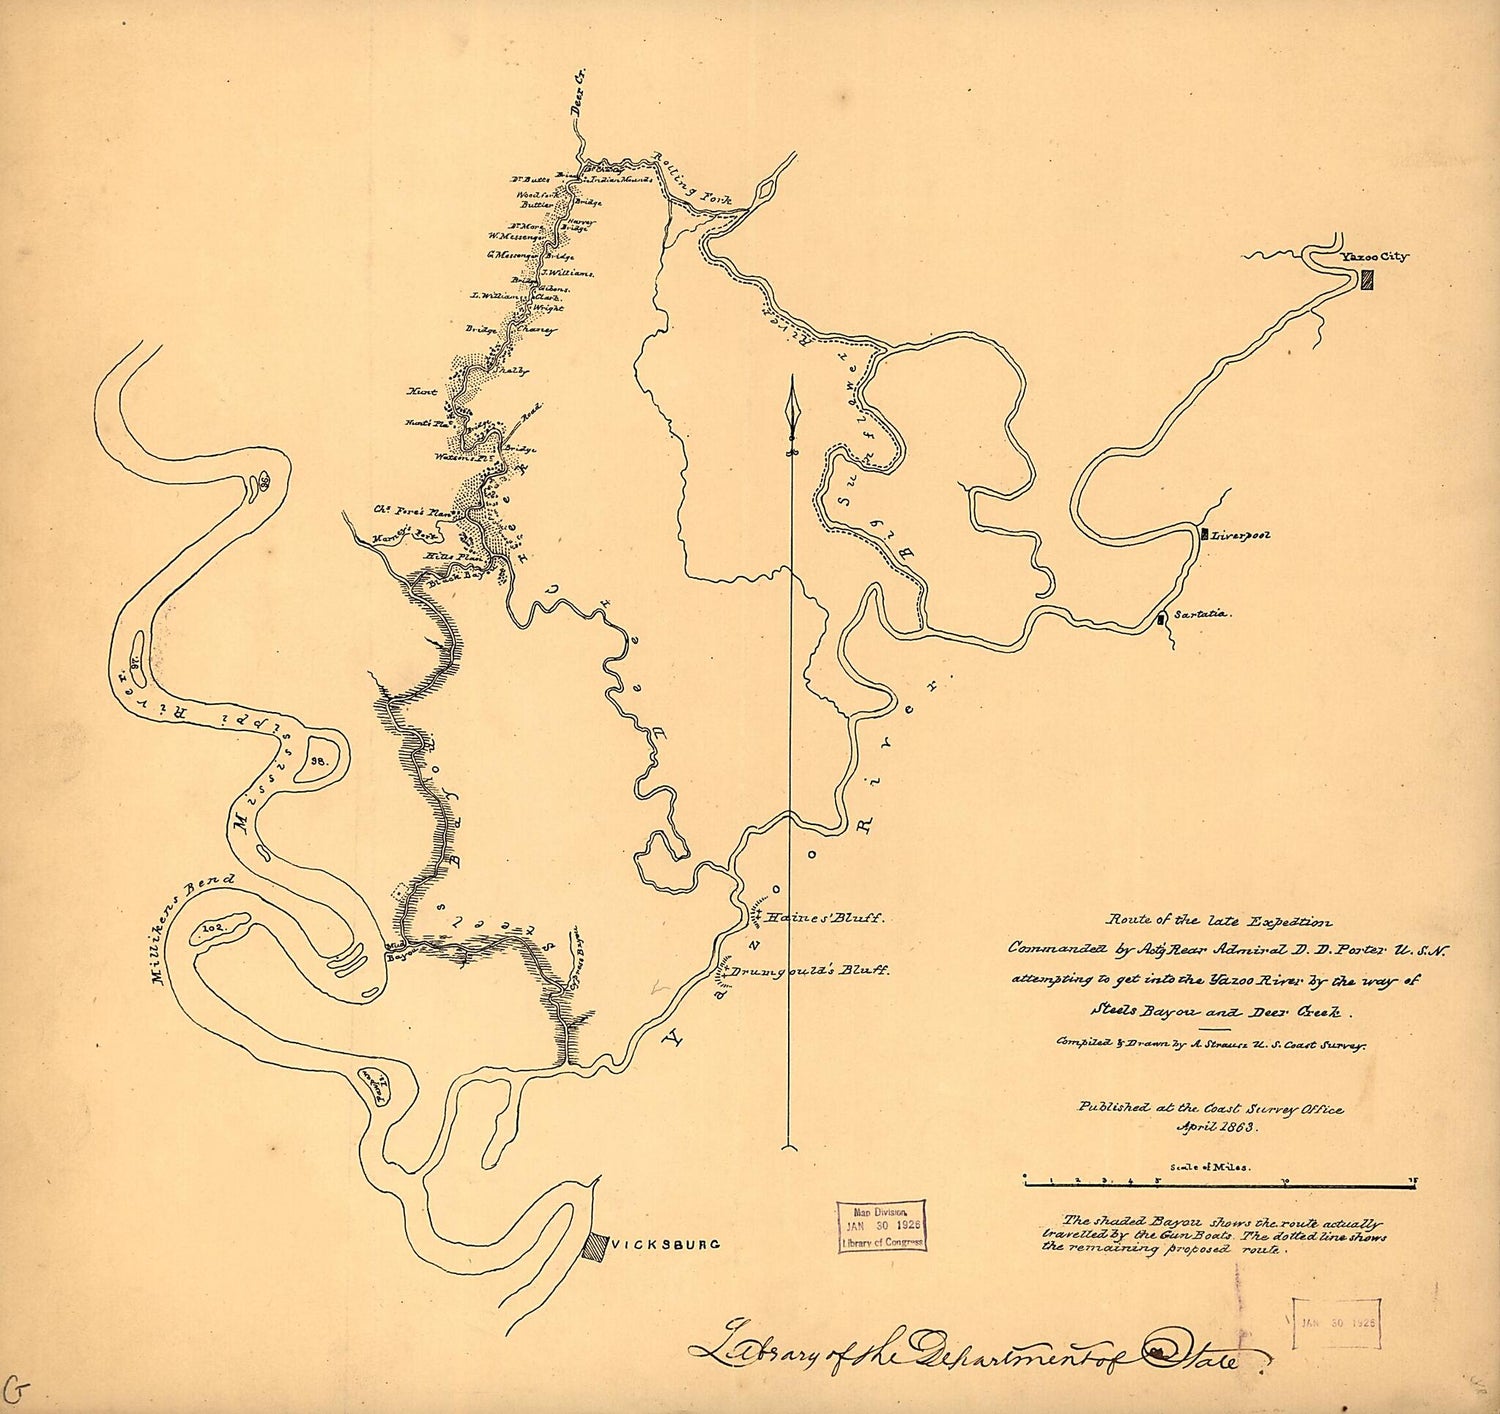 This old map of Route of the Late Expedtion sic Commanded by Act&